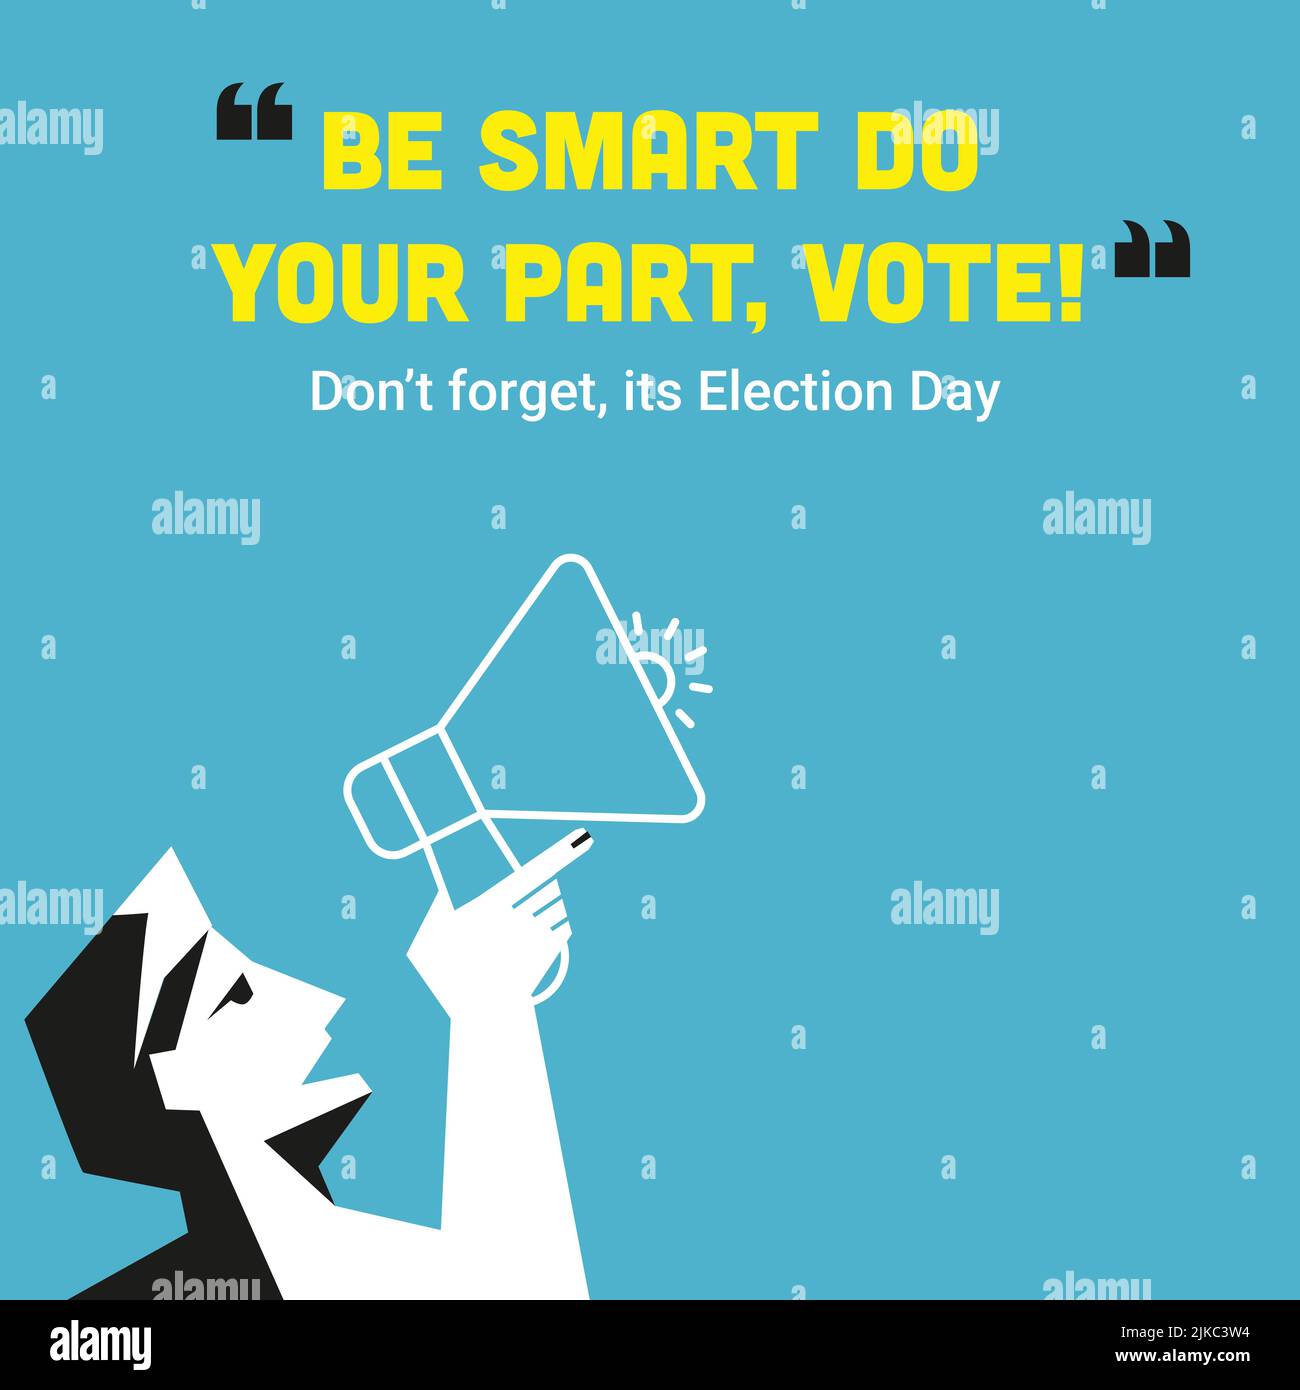 Be Smart Do Your Part Vote! And Don't Forget Election Day Poster Design With Cartoon Man Announcing From Megaphone. Stock Vector